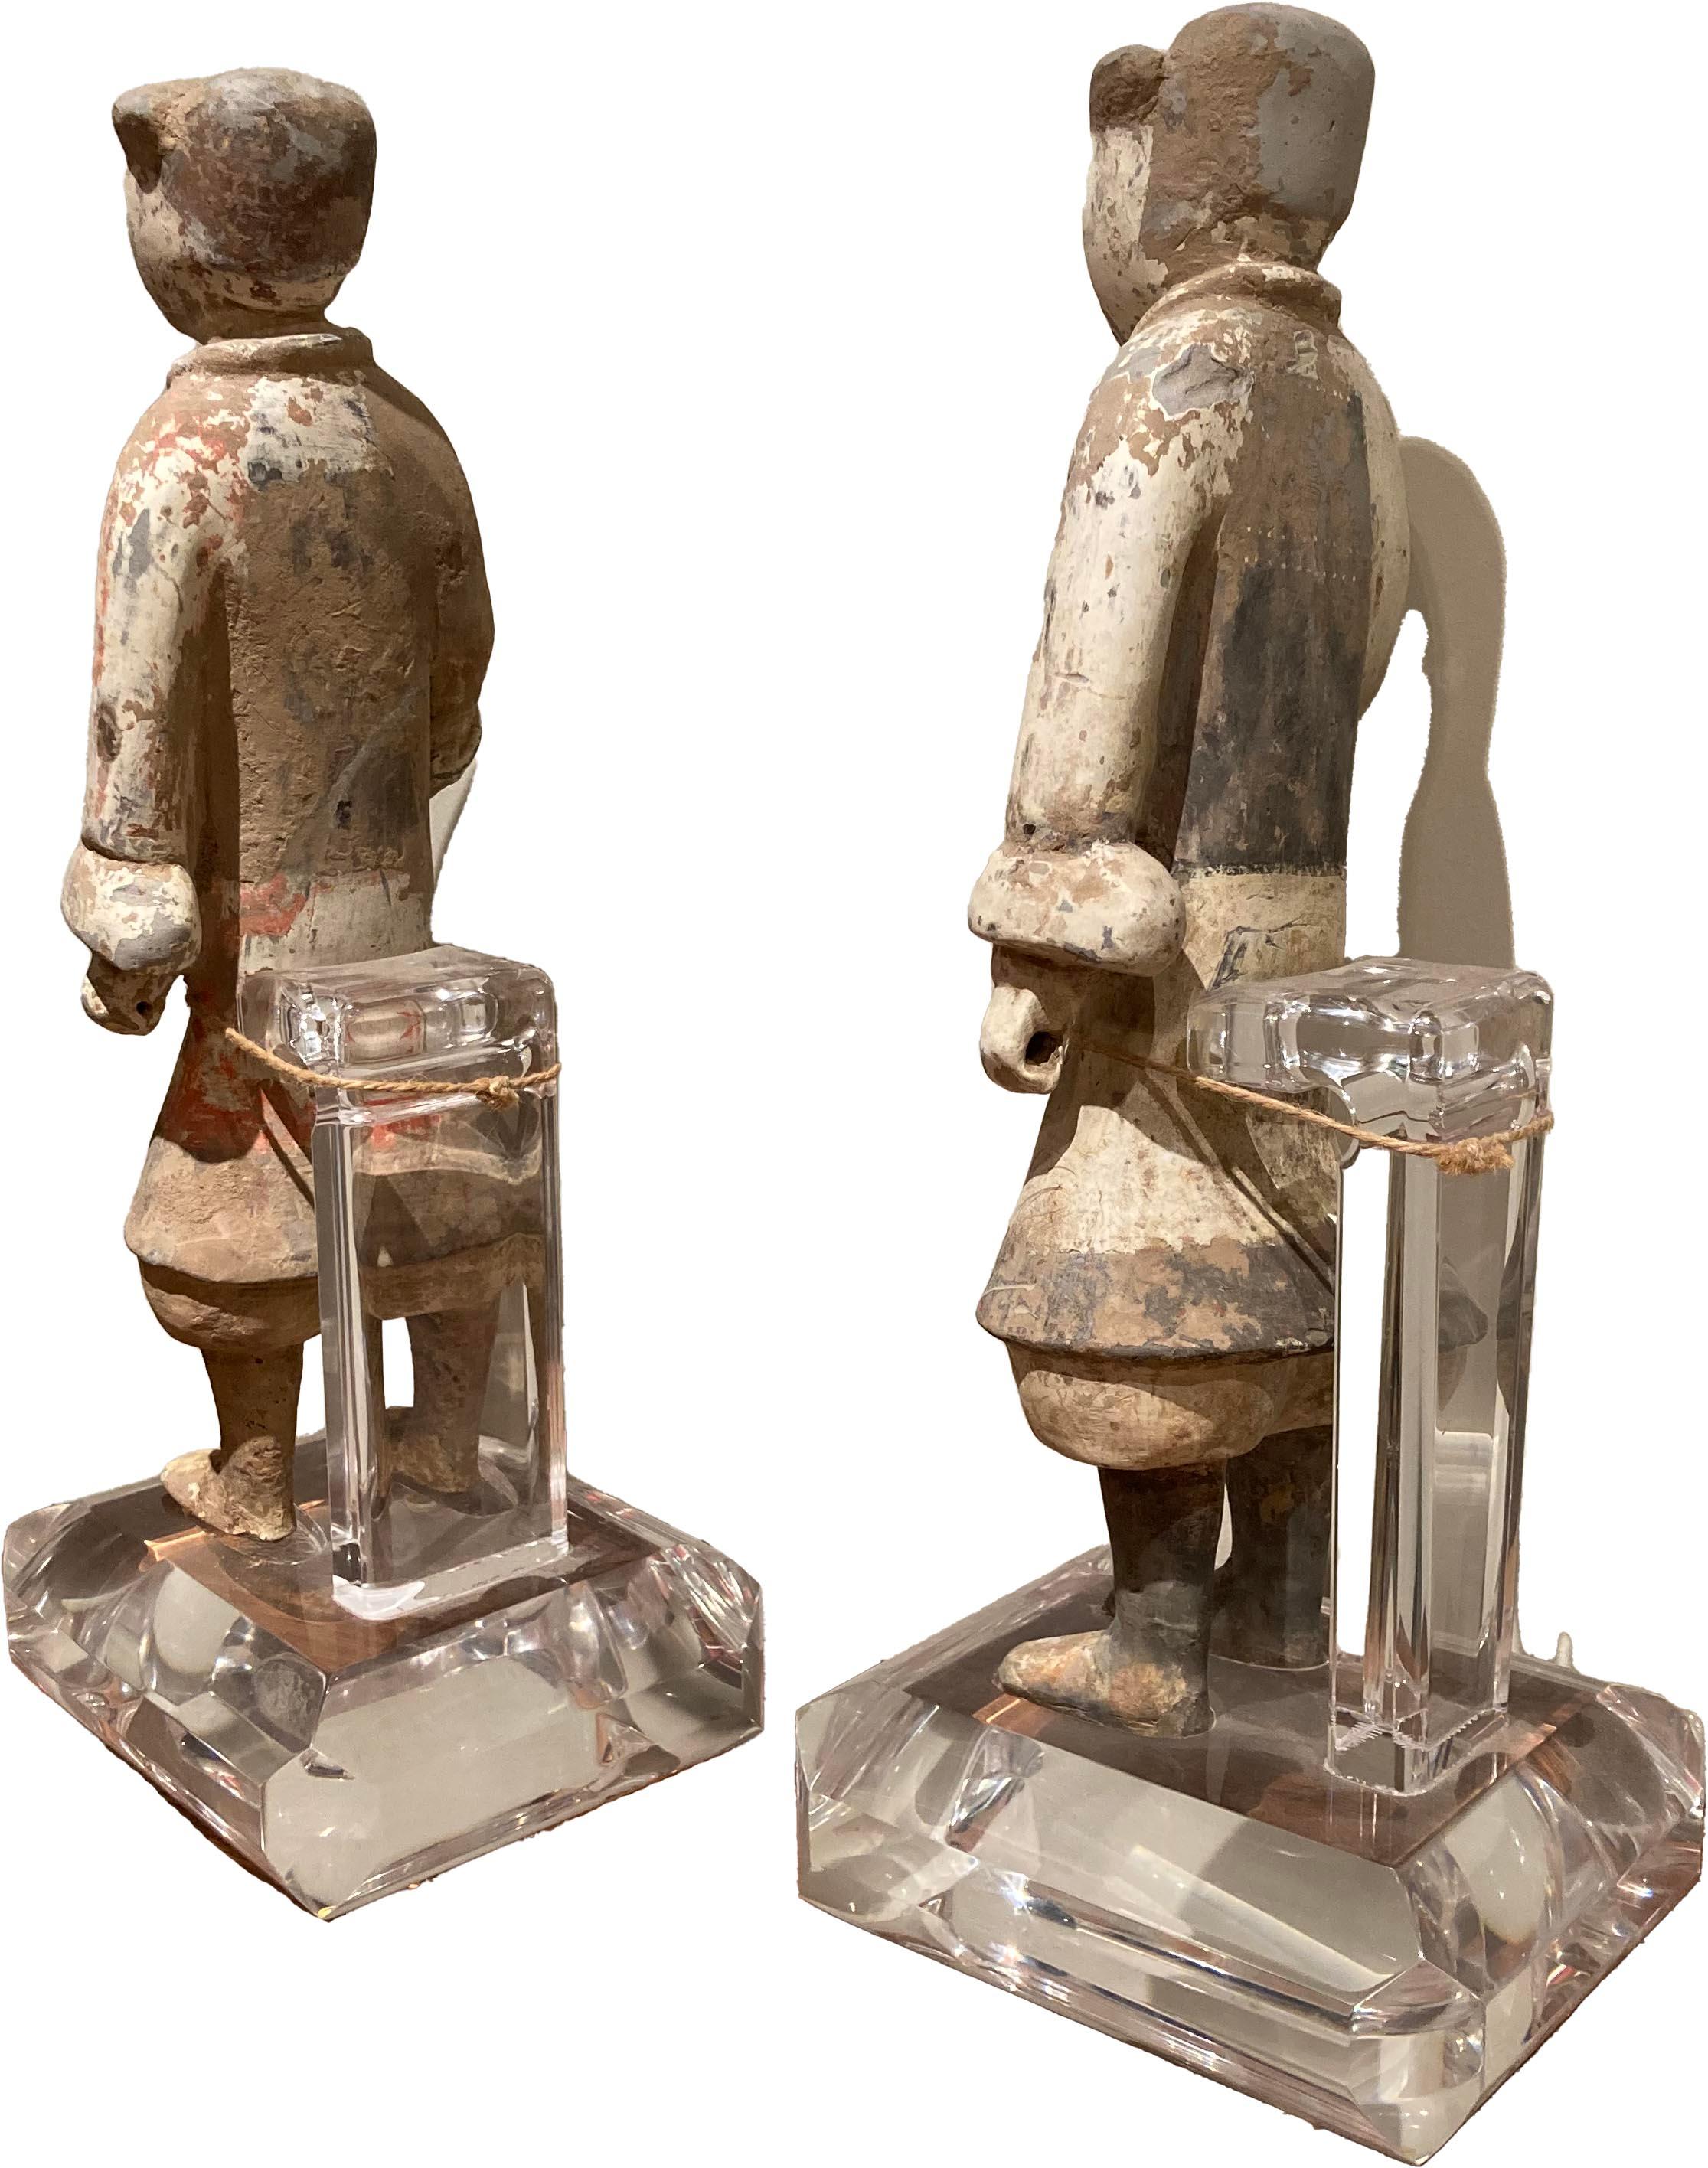 Pair of Terra Cotta soldier burial figurines on lucite bases. These are two well-preserved figures with some paint chipping and ware - painted white and grey. Created in the style of the Han Dynasty.